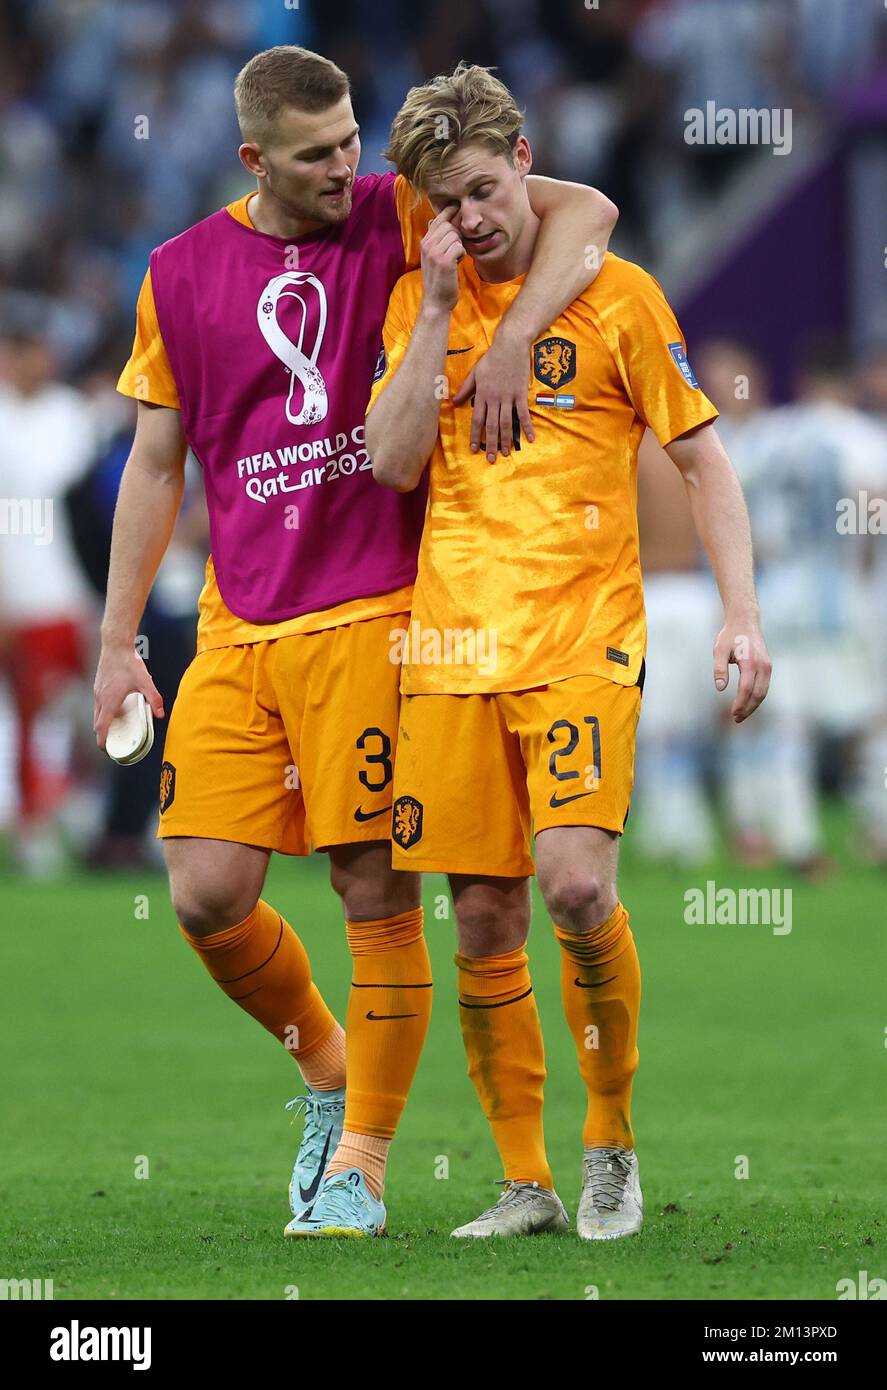 Doha, Qatar, 9th December 2022. Matthijs de Ligt of Netherlands and Frenkie de Jong of Netherlands dejected during the FIFA World Cup 2022 match at Lusail Stadium, Doha. Picture credit should read: David Klein / Sportimage Credit: Sportimage/Alamy Live News Stock Photo